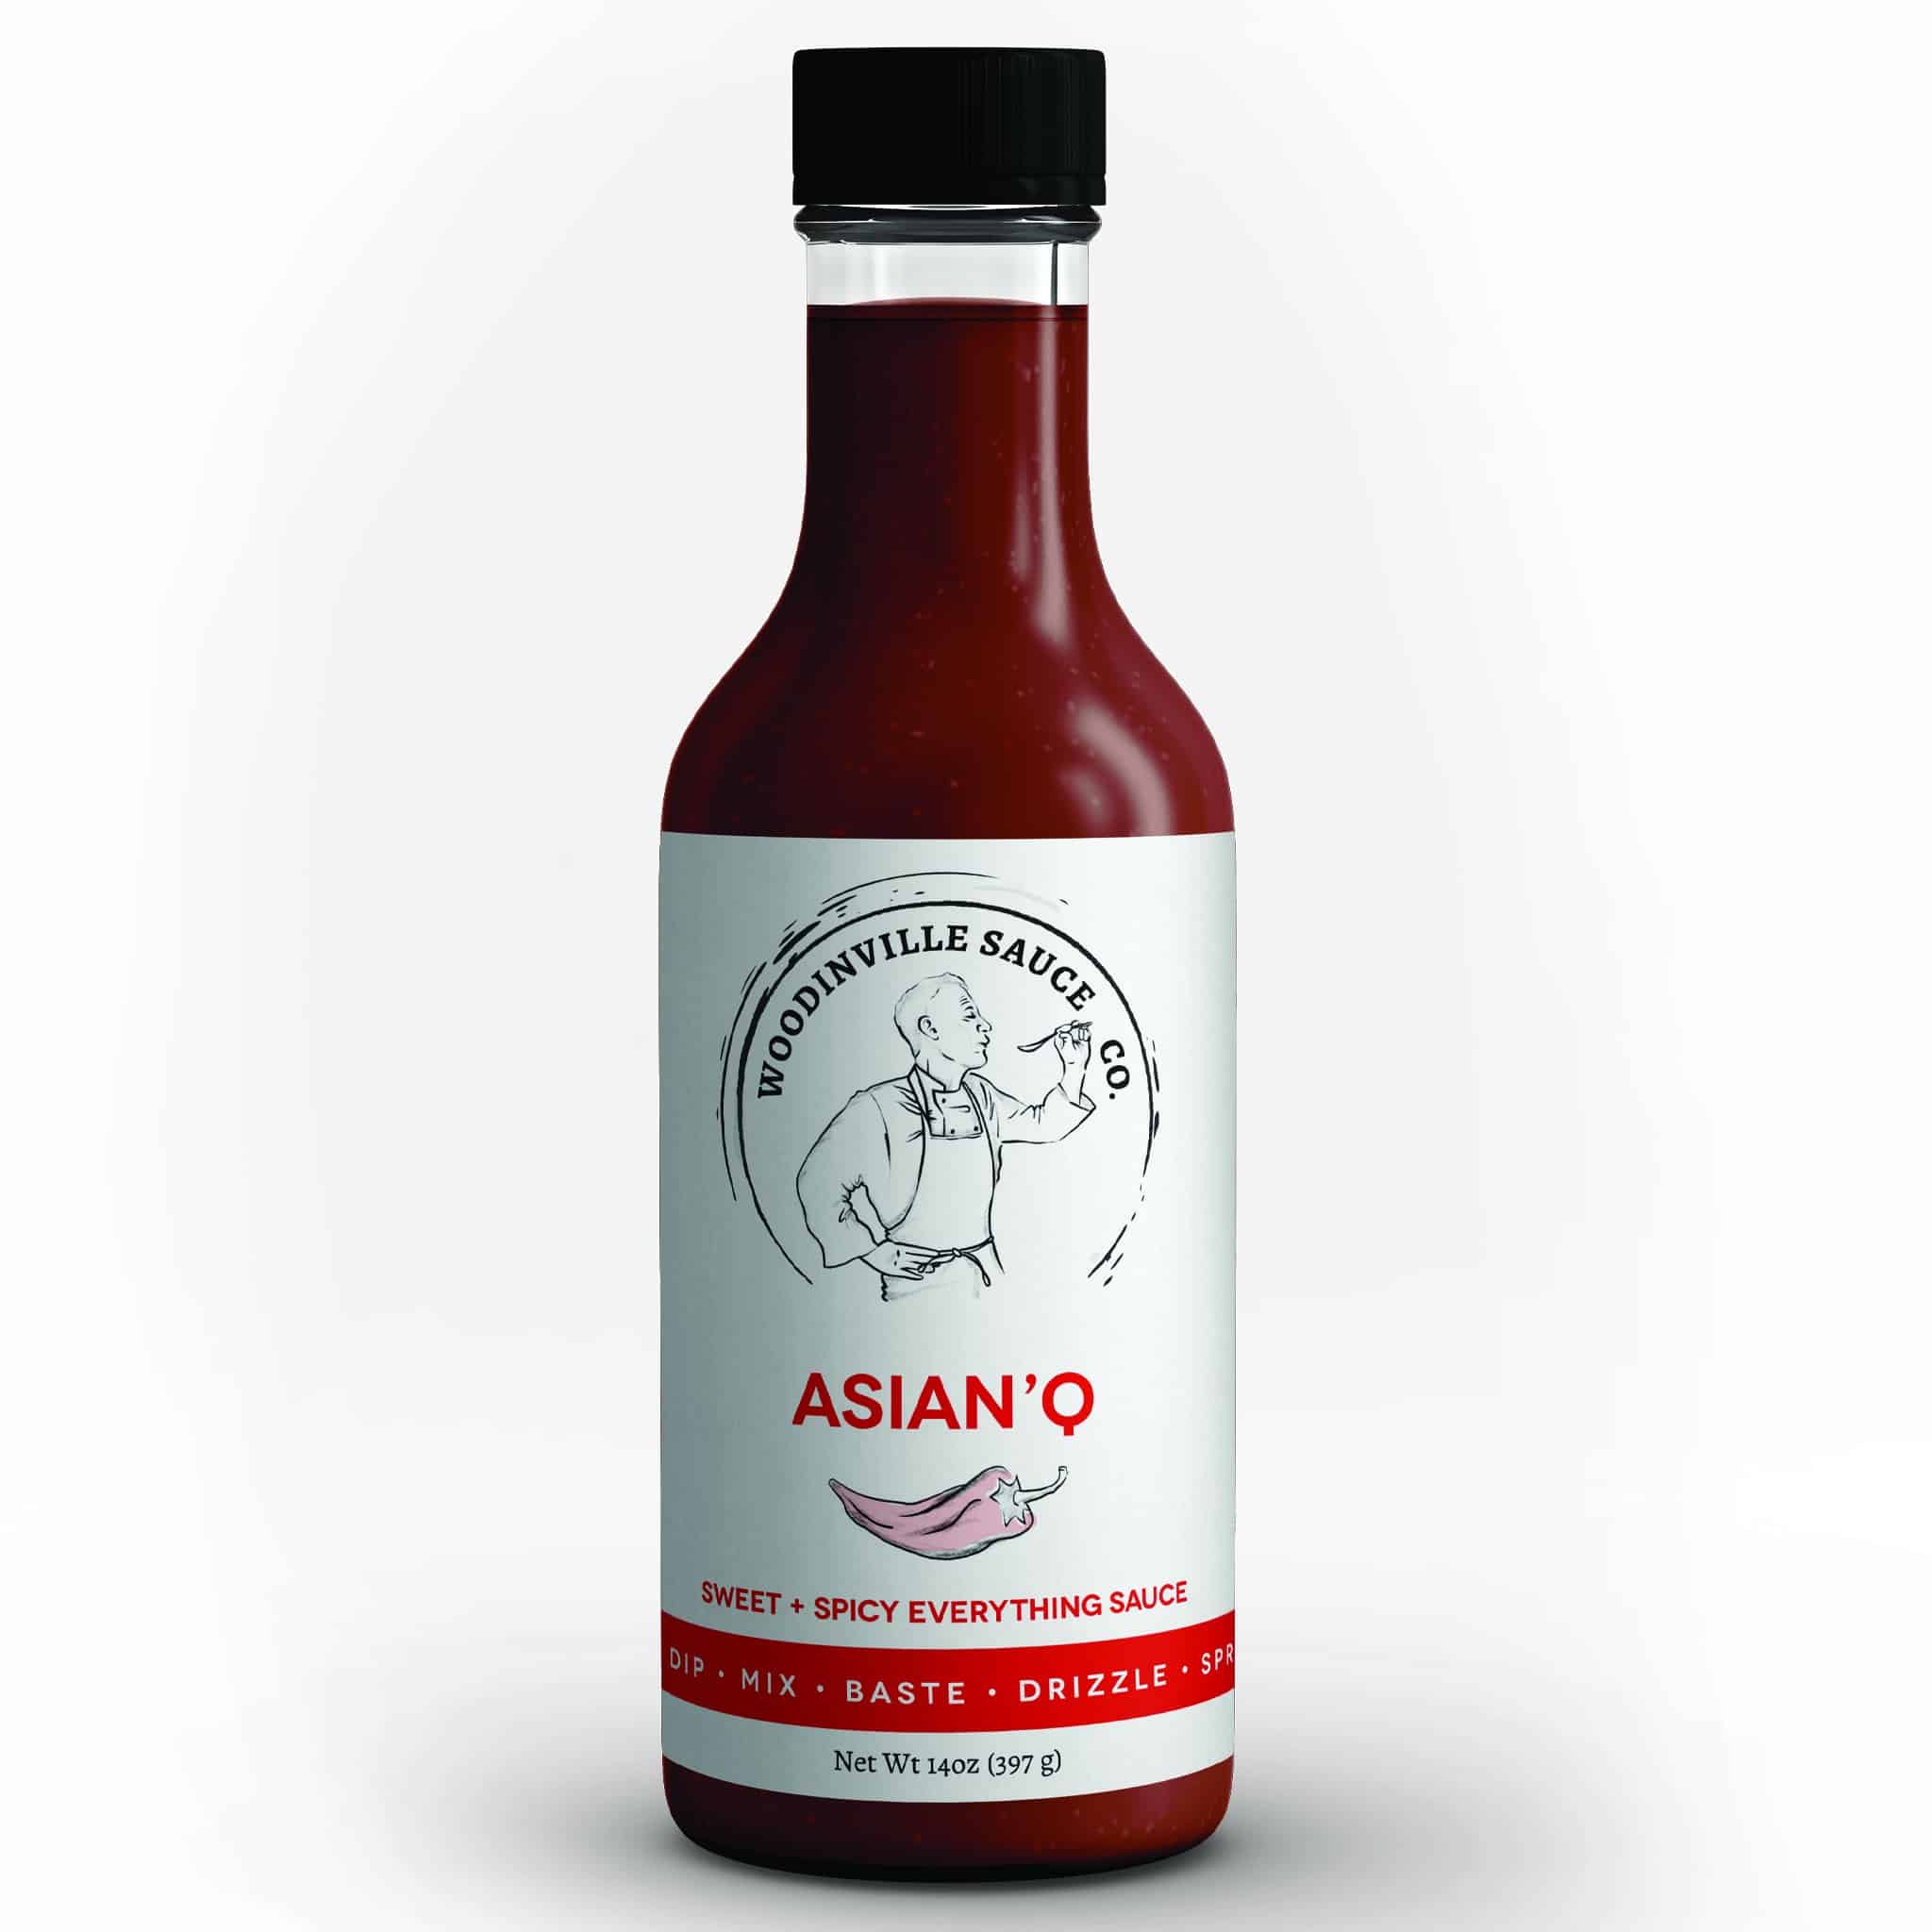 Asian'Q Sweet and Spicy Everything Sauce